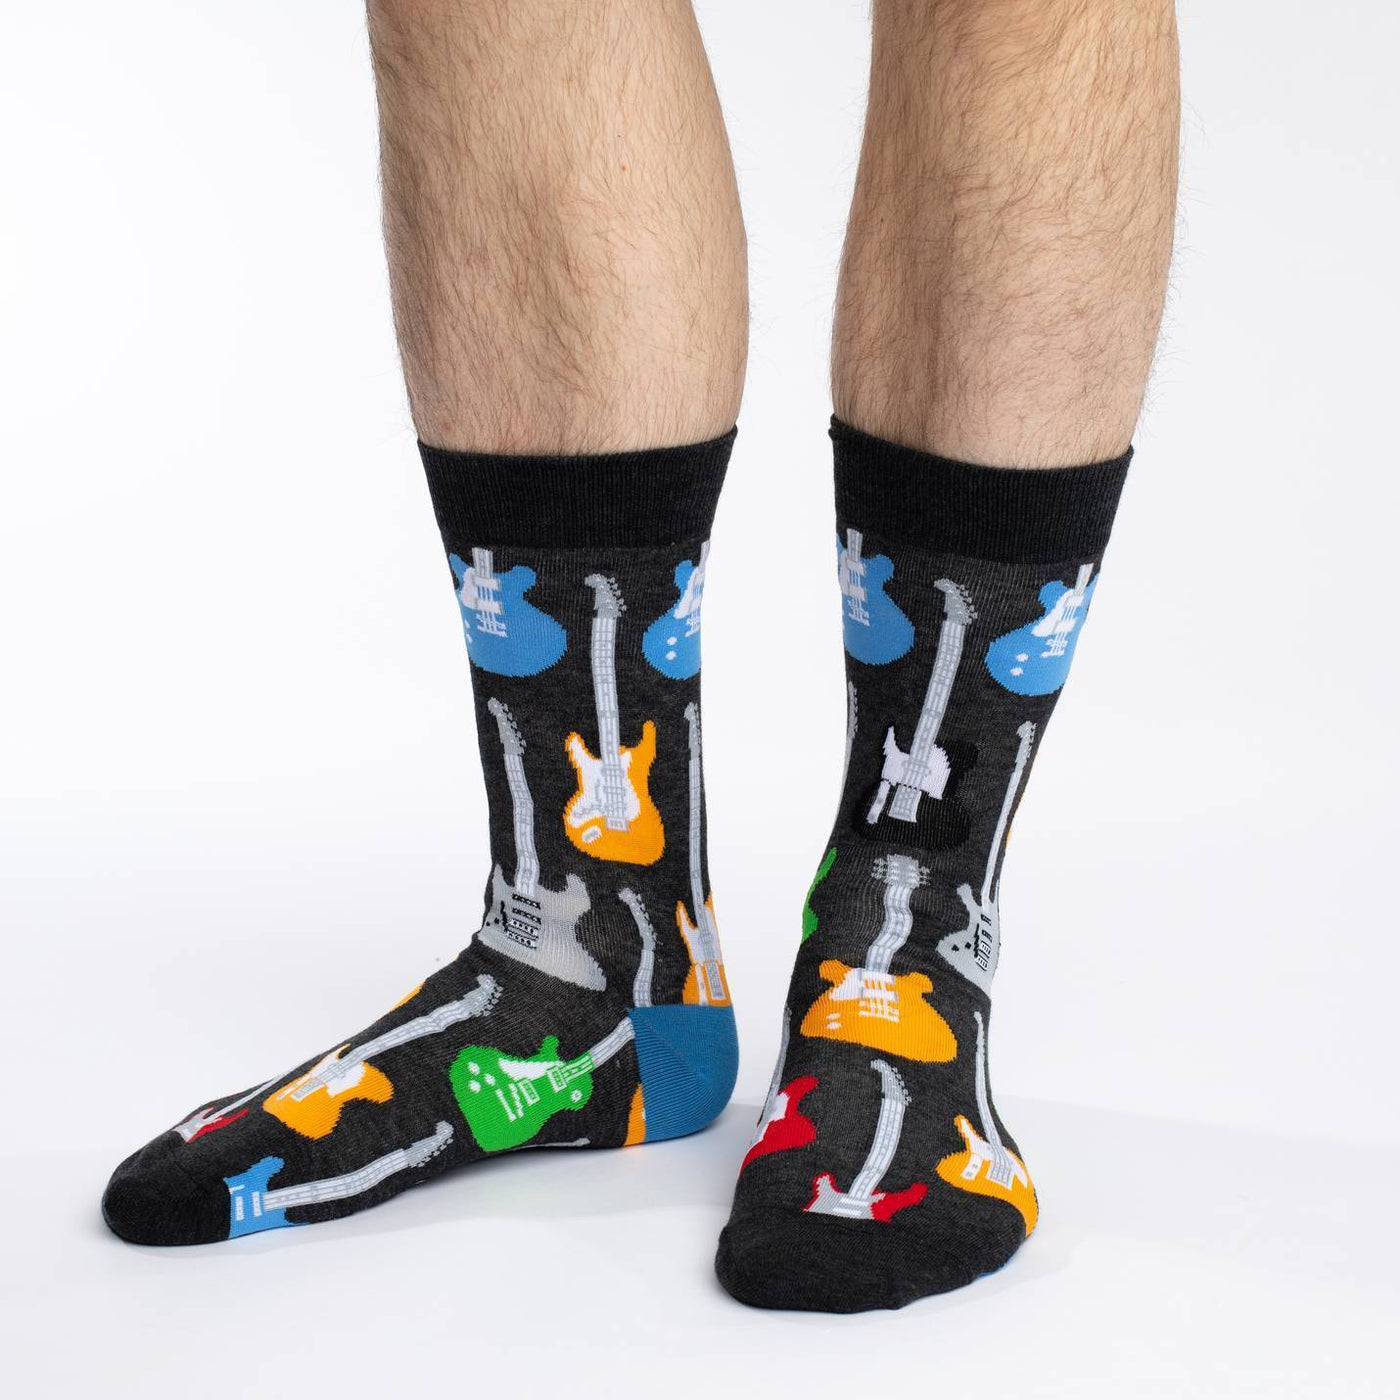 Electric Guitars Cotton Crew Socks by Good Luck Sock